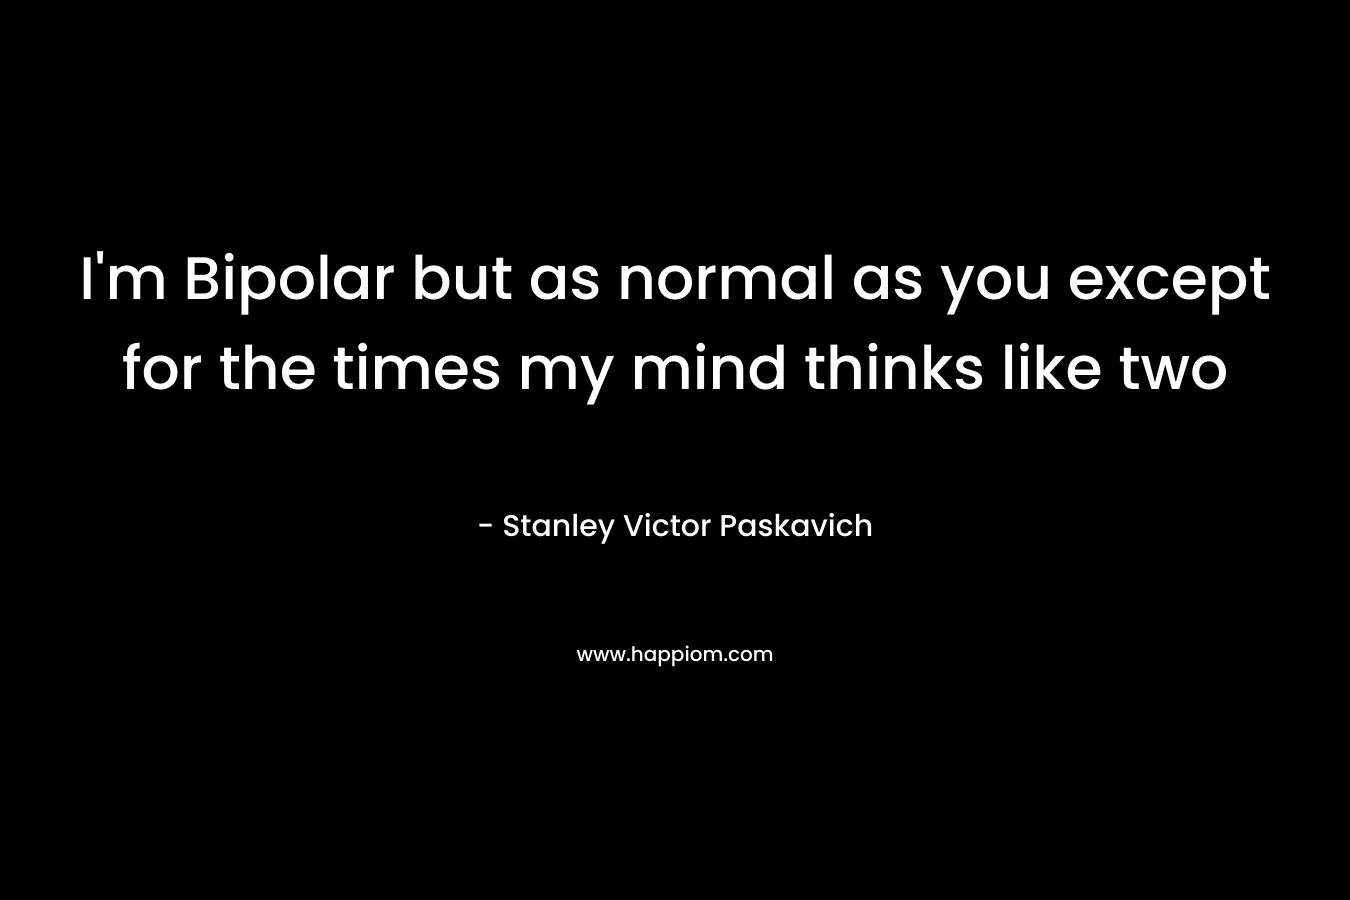 I'm Bipolar but as normal as you except for the times my mind thinks like two